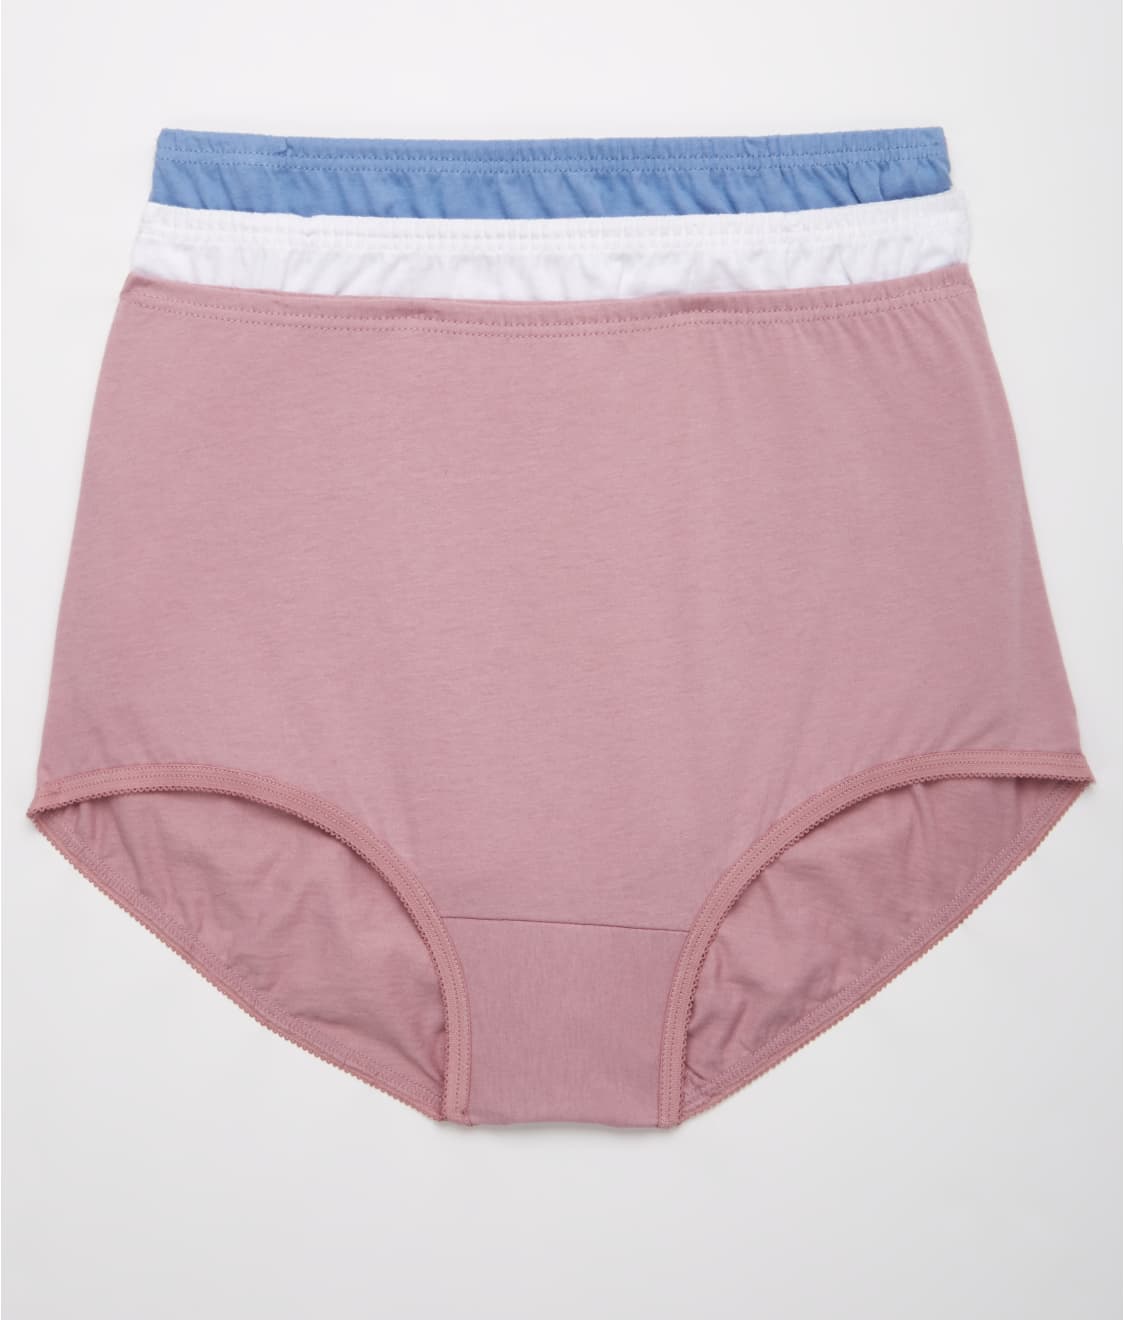 Vanity Fair Perfectly Yours Cotton Brief 3-Pack & Reviews | Bare ...